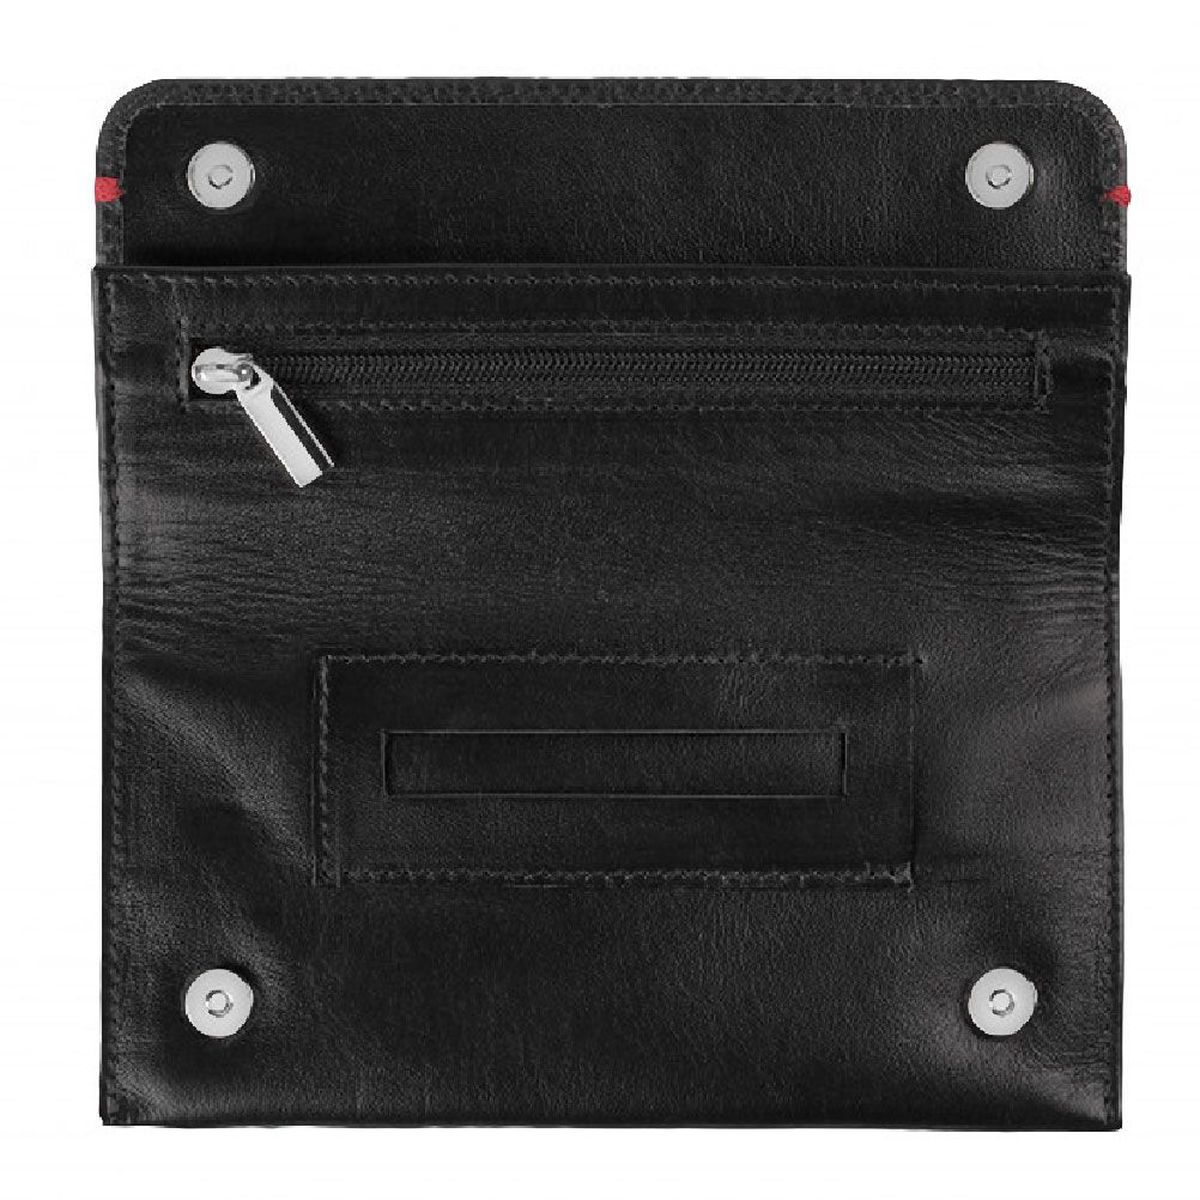 Zippo tobacco pouch in double textured leather